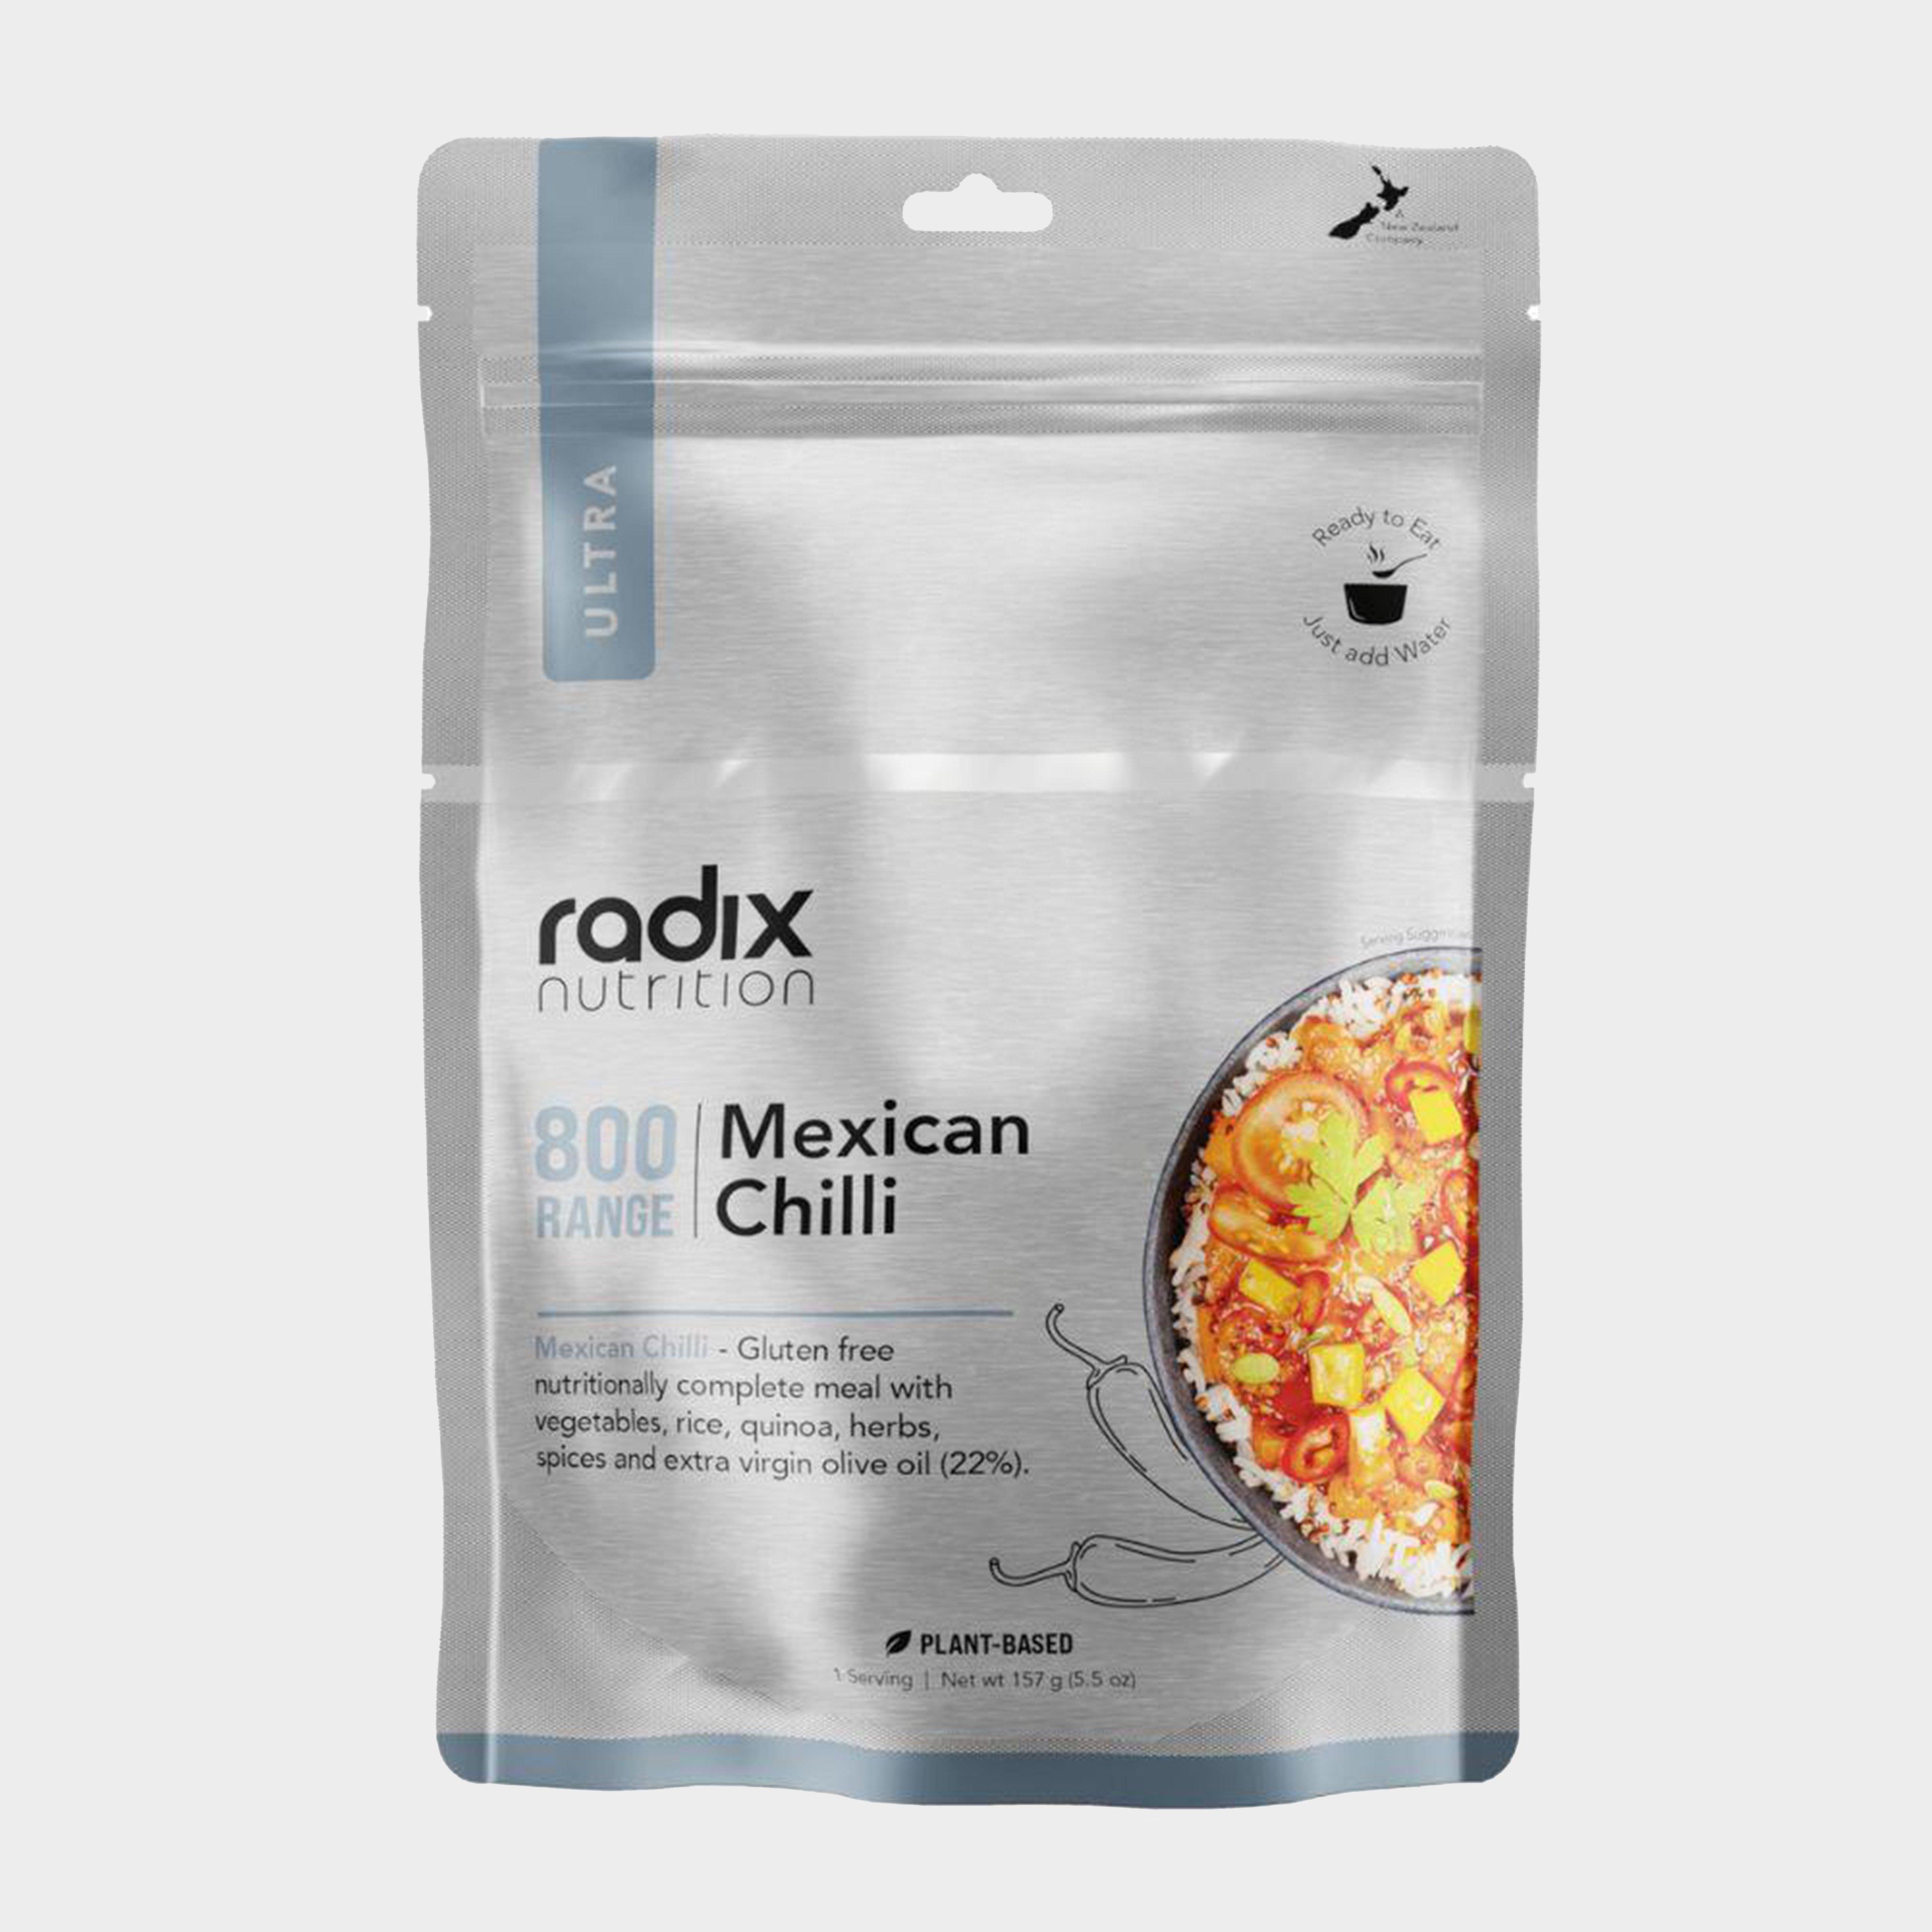 Image of Radix Original Mexican Chilli Meal 600Kcal - 800, 800